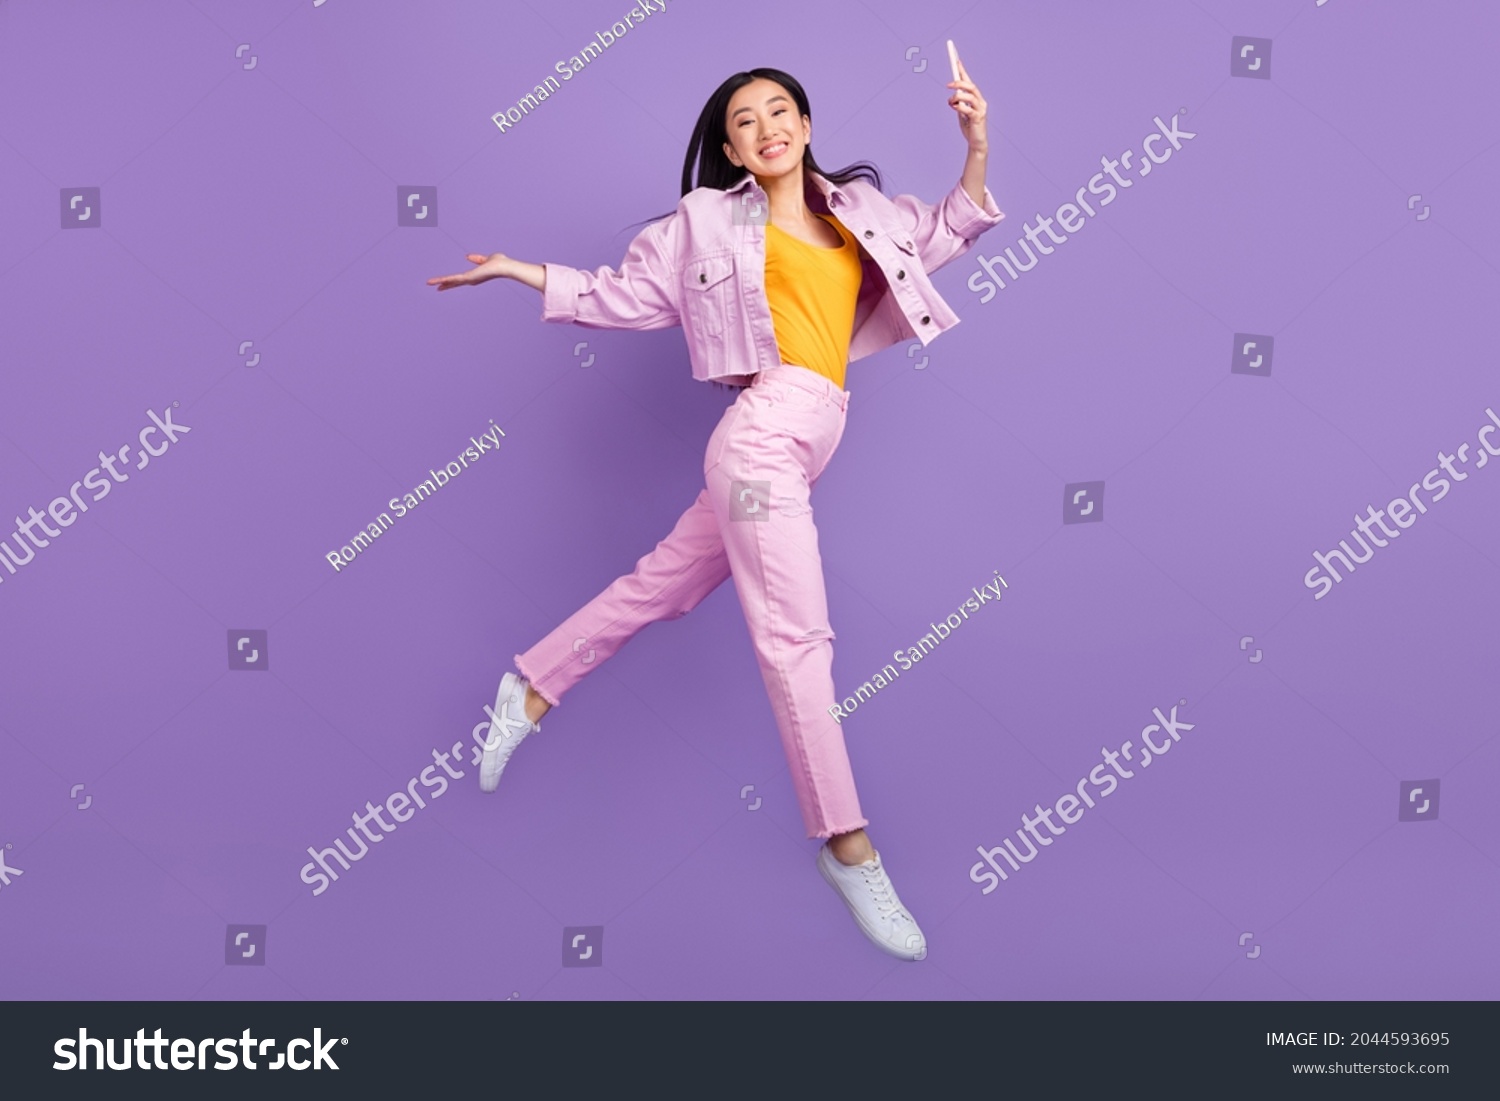 Full size profile photo of funky young brunette lady jump hold telephone wear jacket jeans sneakers isolated on violet background #2044593695